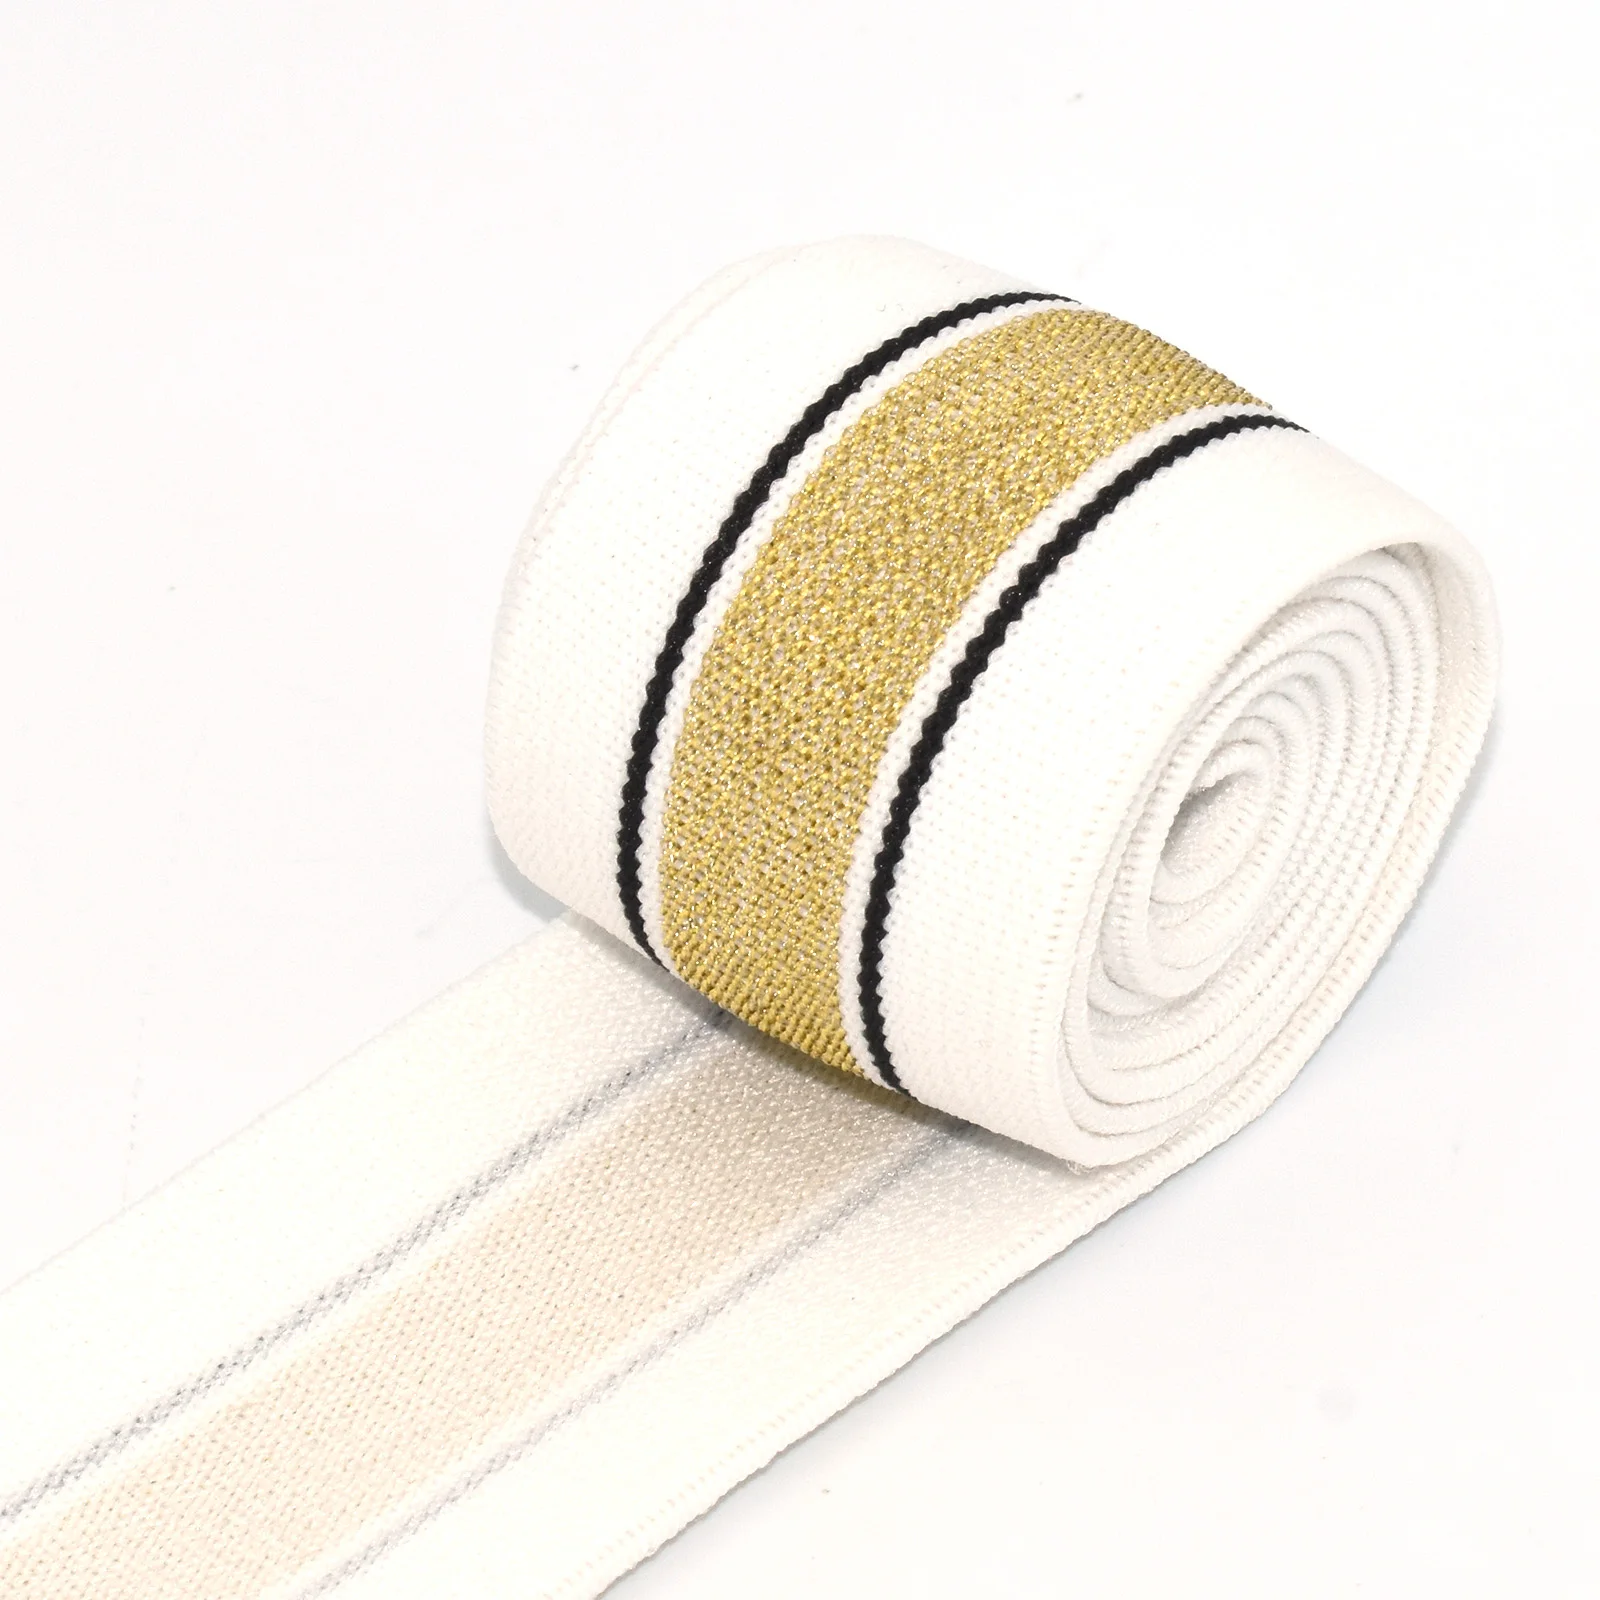 

38mm/1.5inch Elastic Webbing Colorful Ribbon Fabric Colored Stripes Stretch Nylon Belt Leash Purse Strap for Sewing Waistband